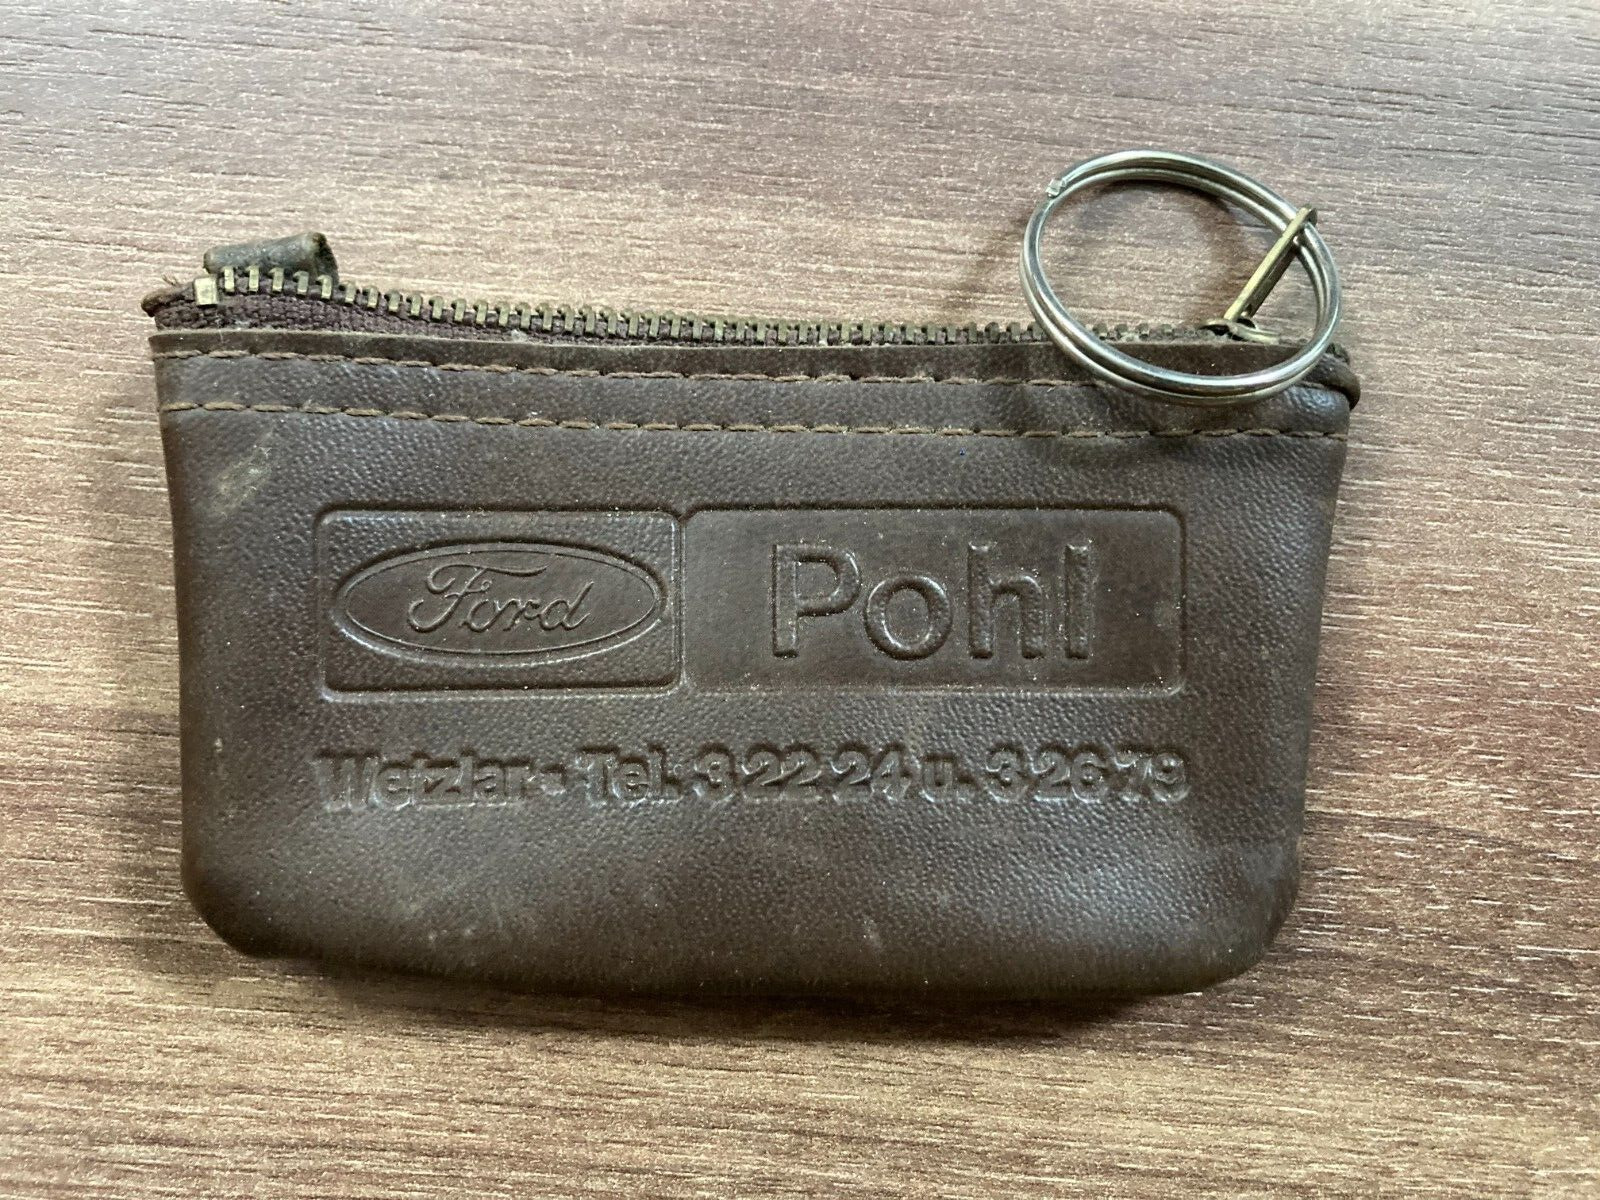 Vintage Ford Danish Leather Keychain Pouch - Rare 1980s Car Dealership